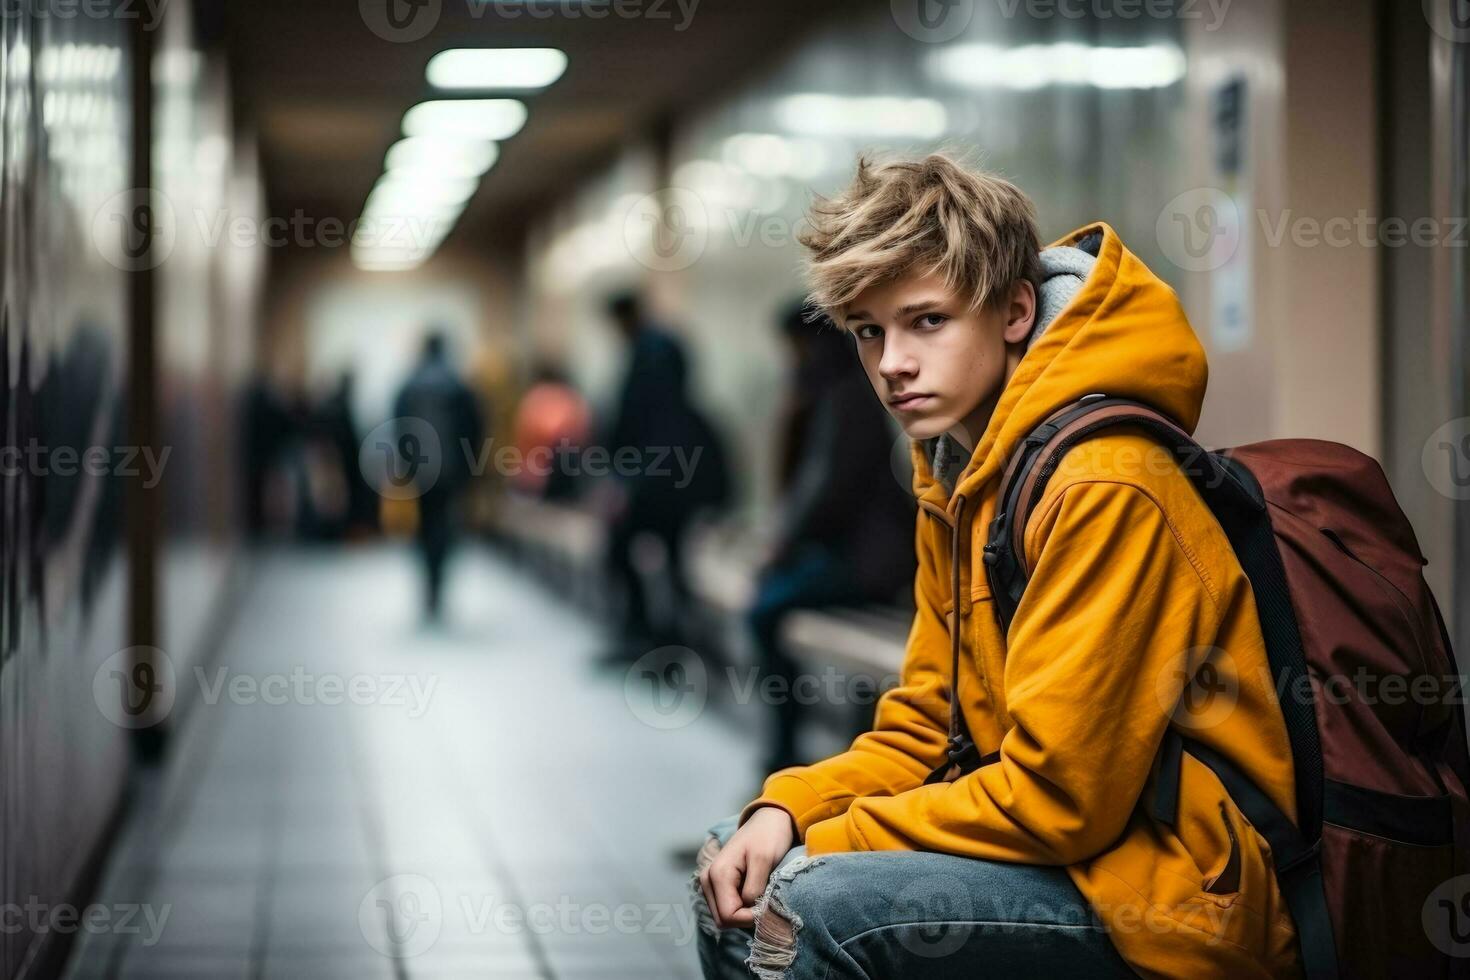 Teenager sitting alone in school hallway background with empty space for text photo